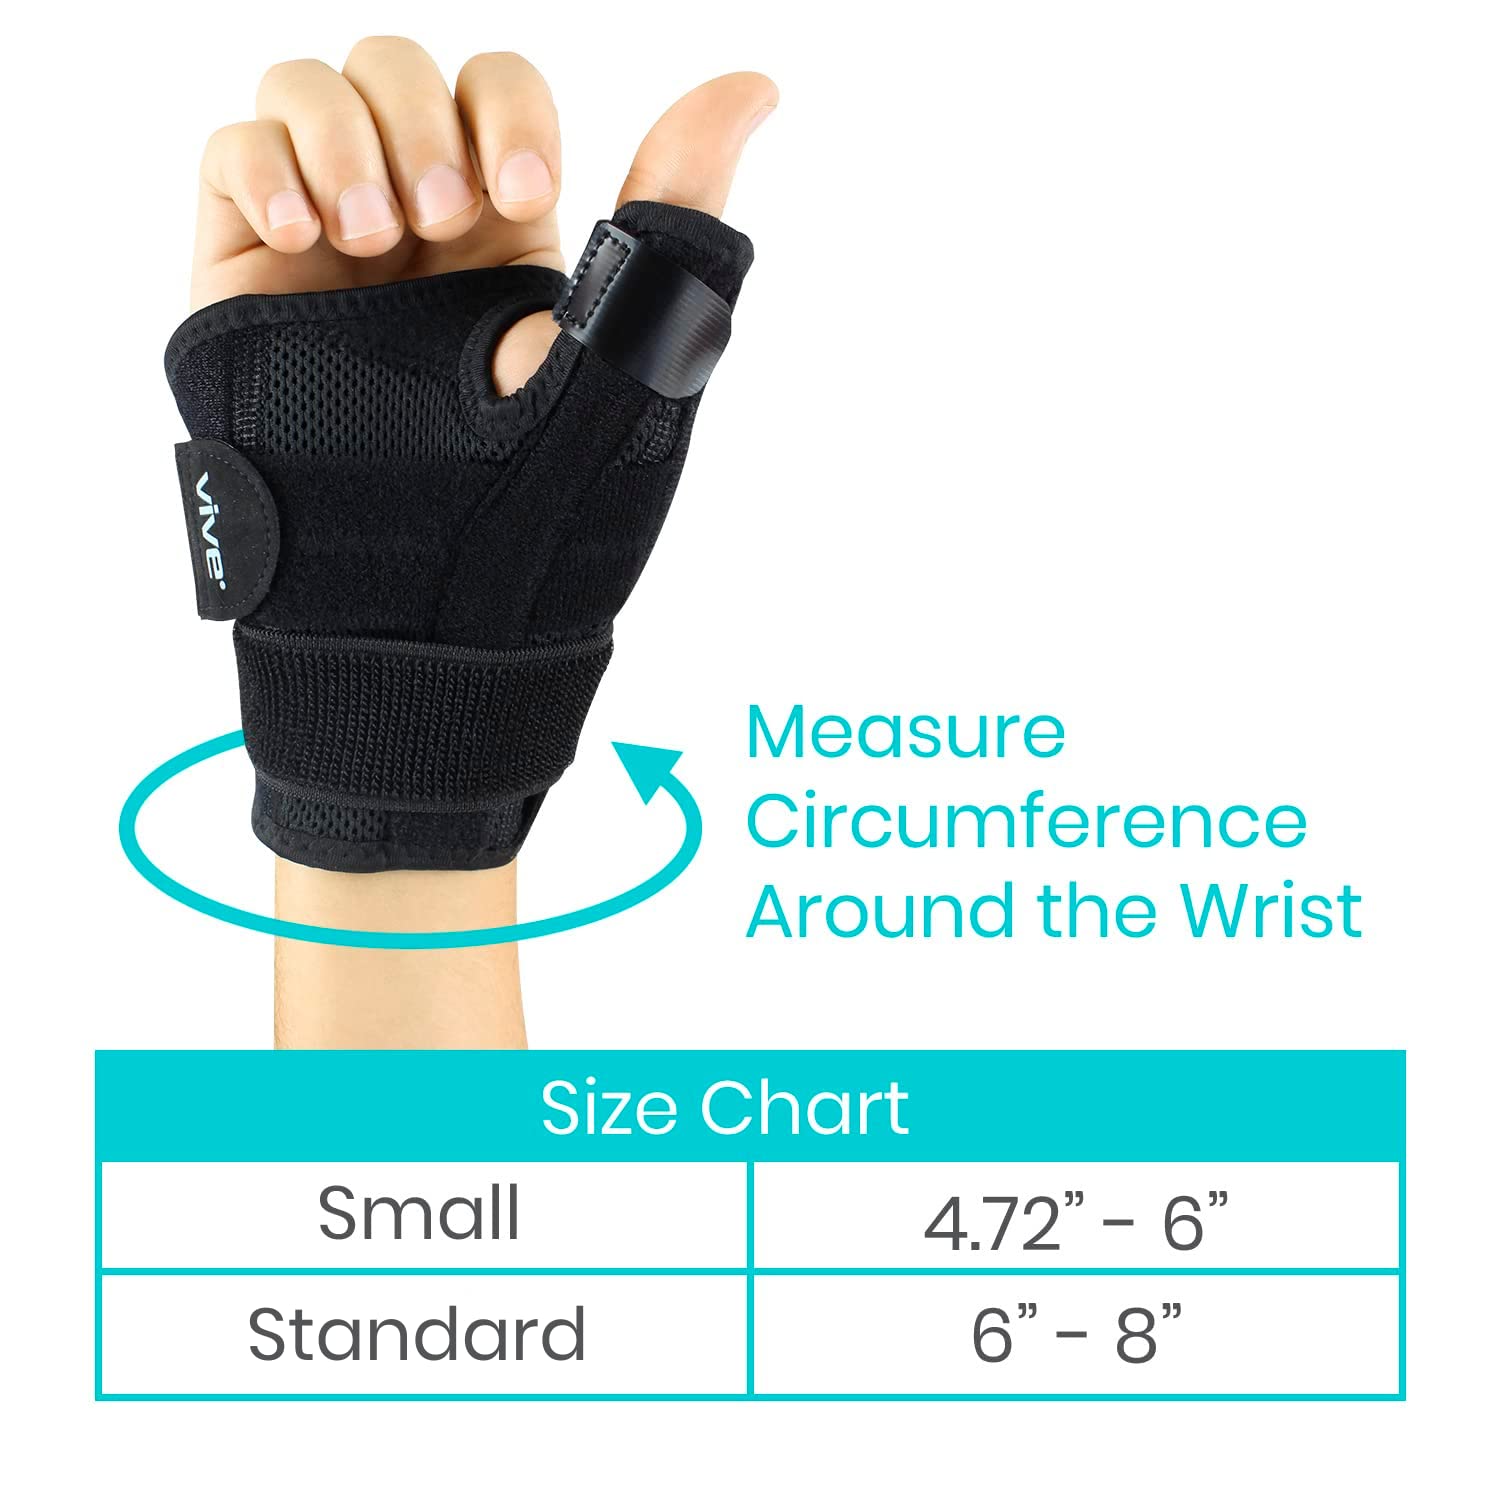 Vive Thumb & Wrist Brace for Right or Left Hand - Spica Splint Brace for Carpal Tunnel, Tendonitis, & Arthritis in Hands or Fingers - Compression Support for Women Men - Stabilizer Relief for Bowling